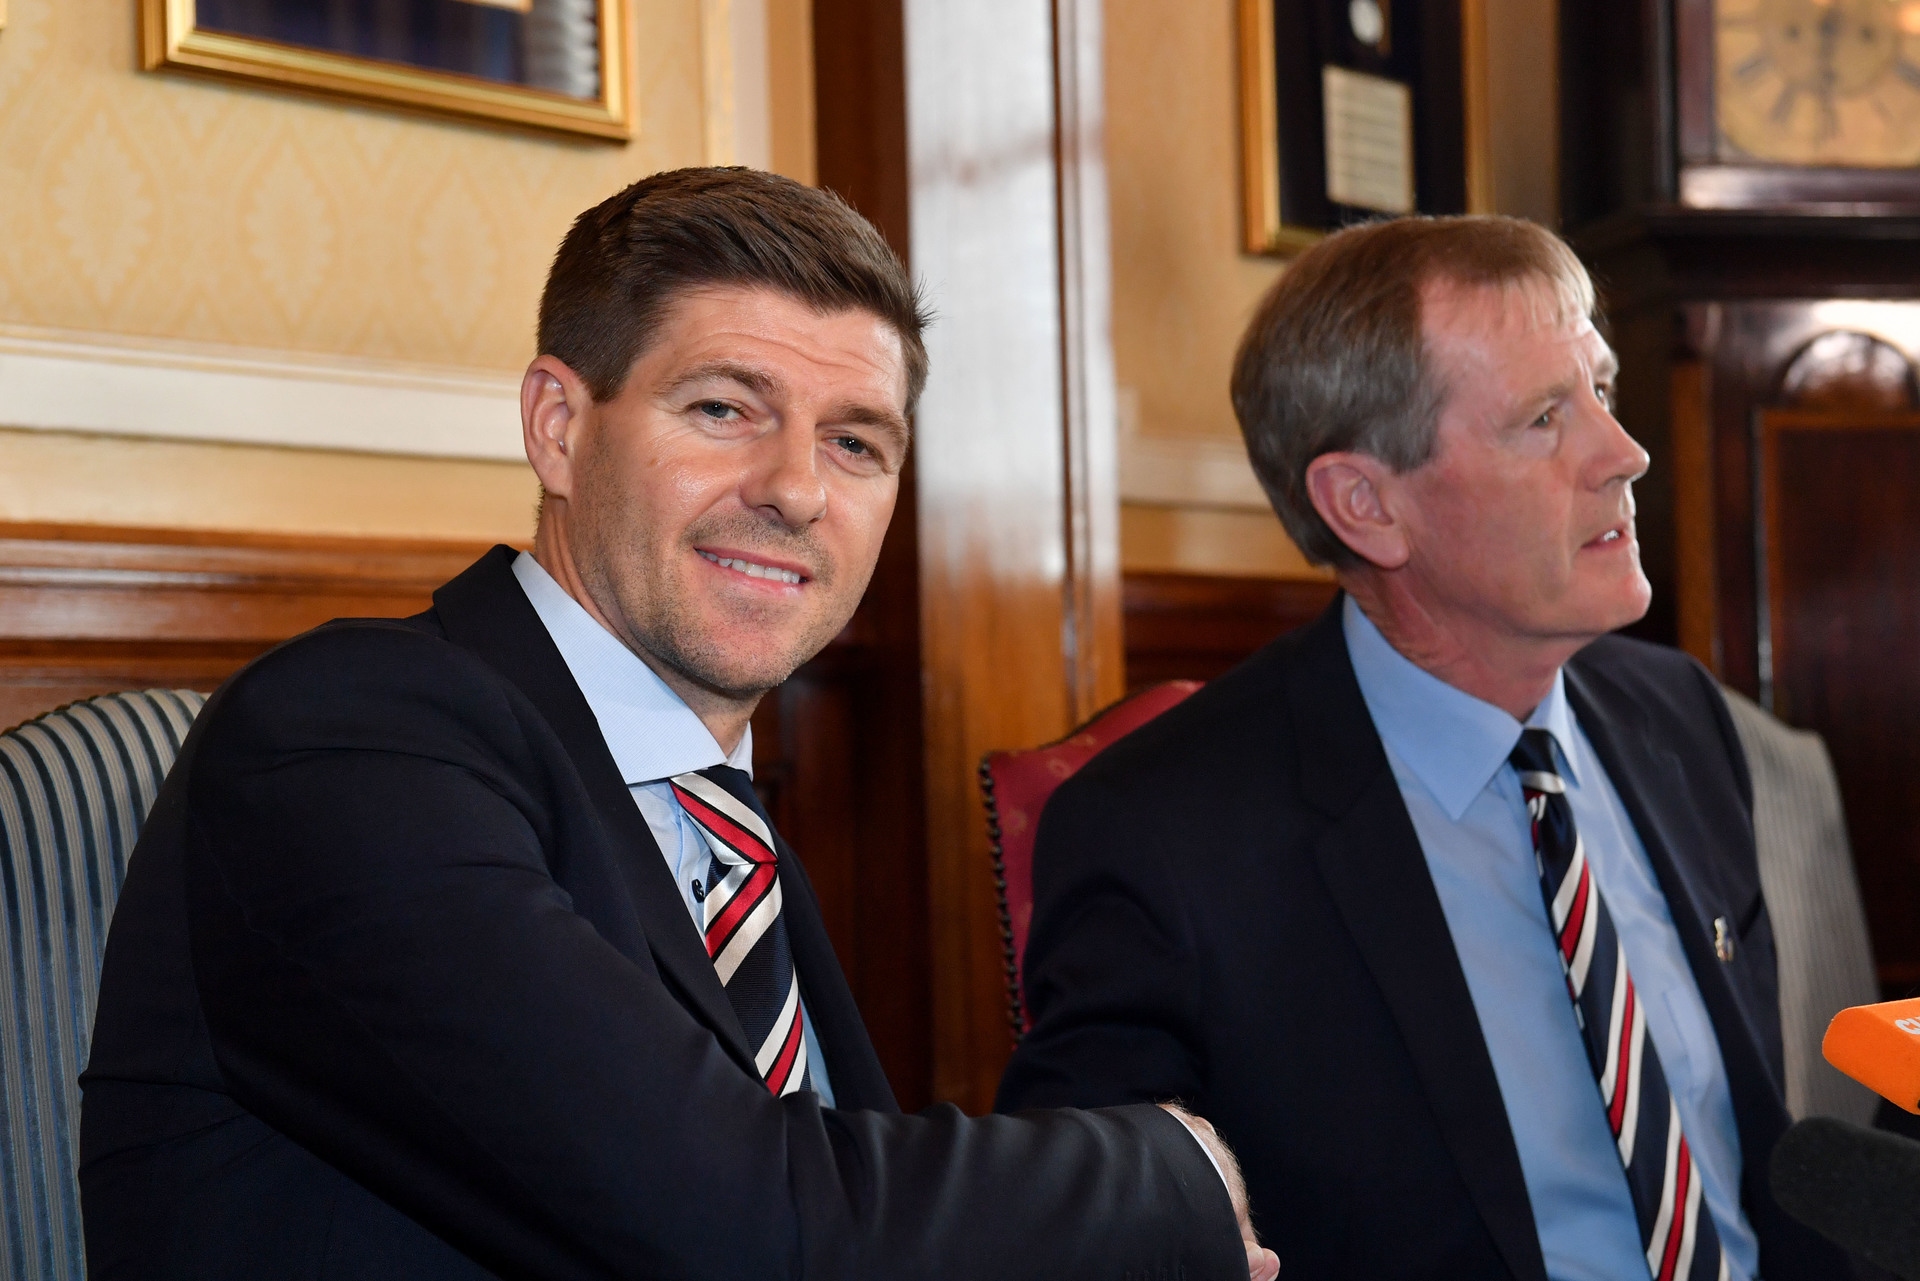 Gerrard signed a four-year deal to become Rangers manager.